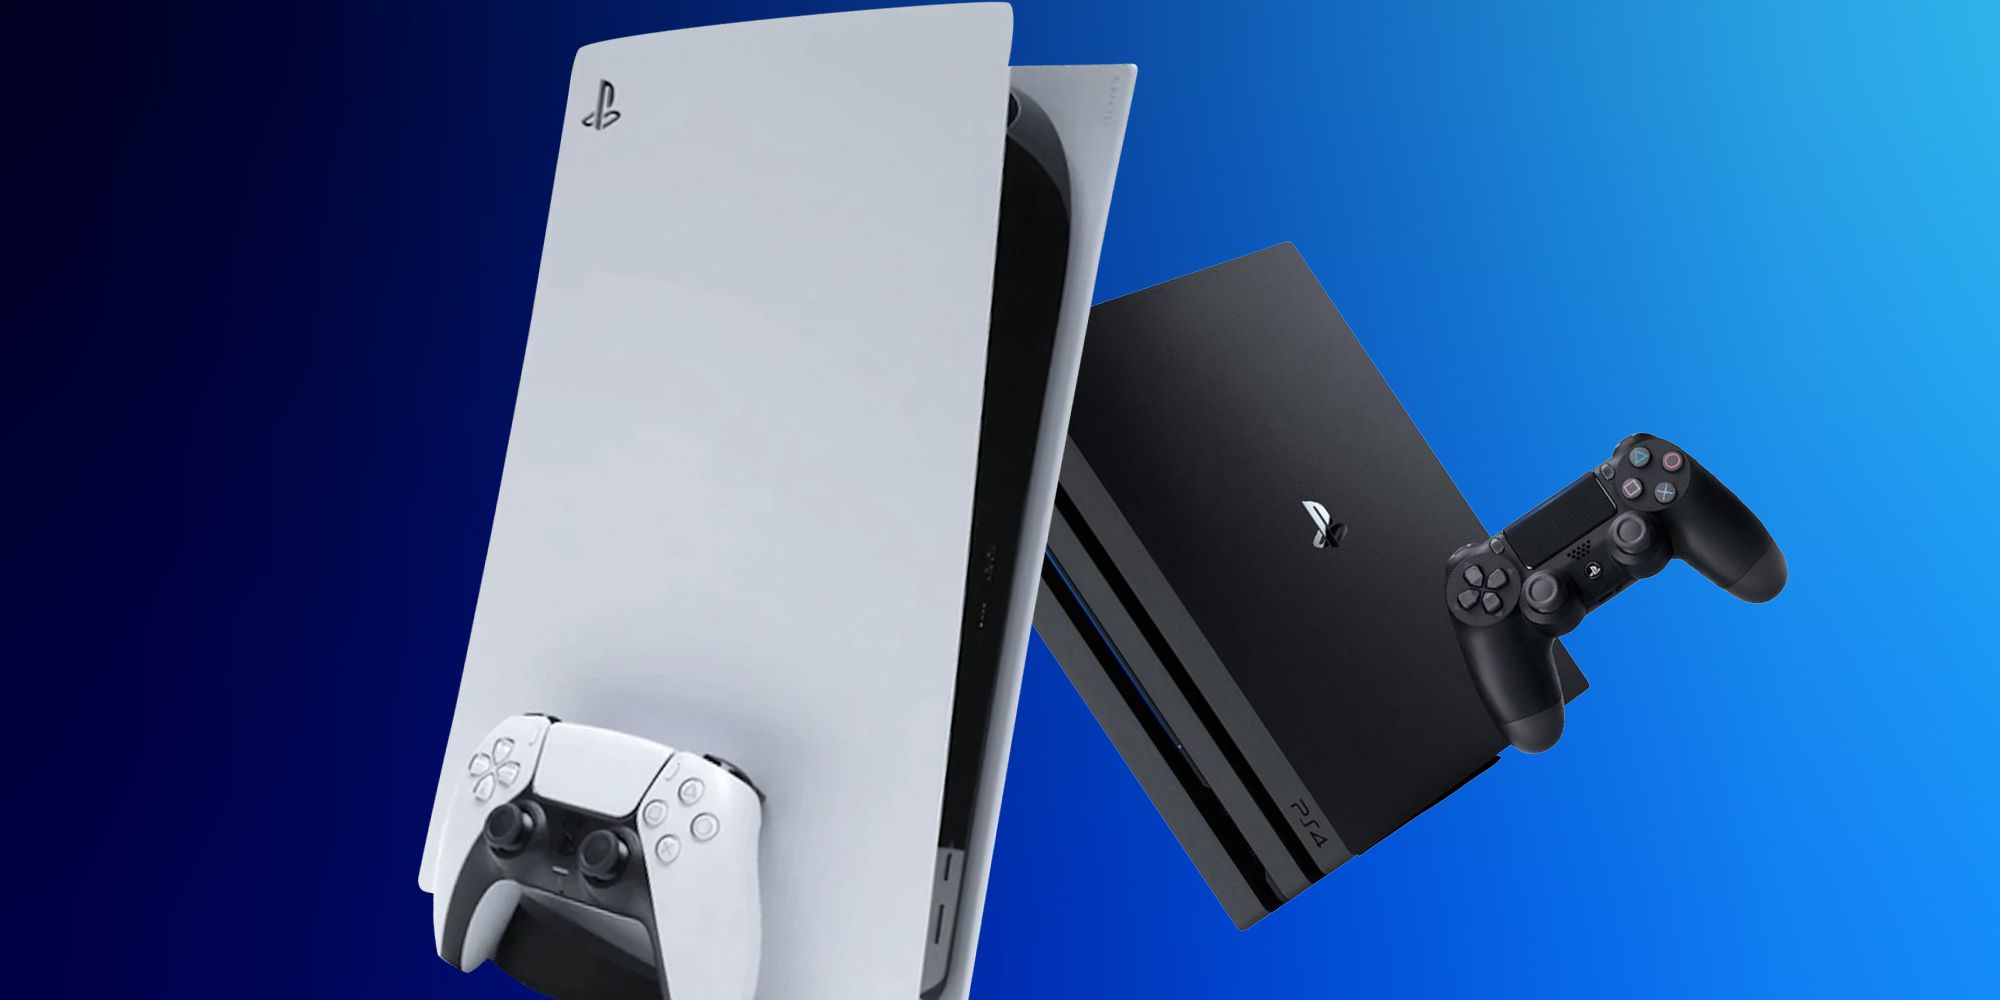 PS5 and PS4 Pro